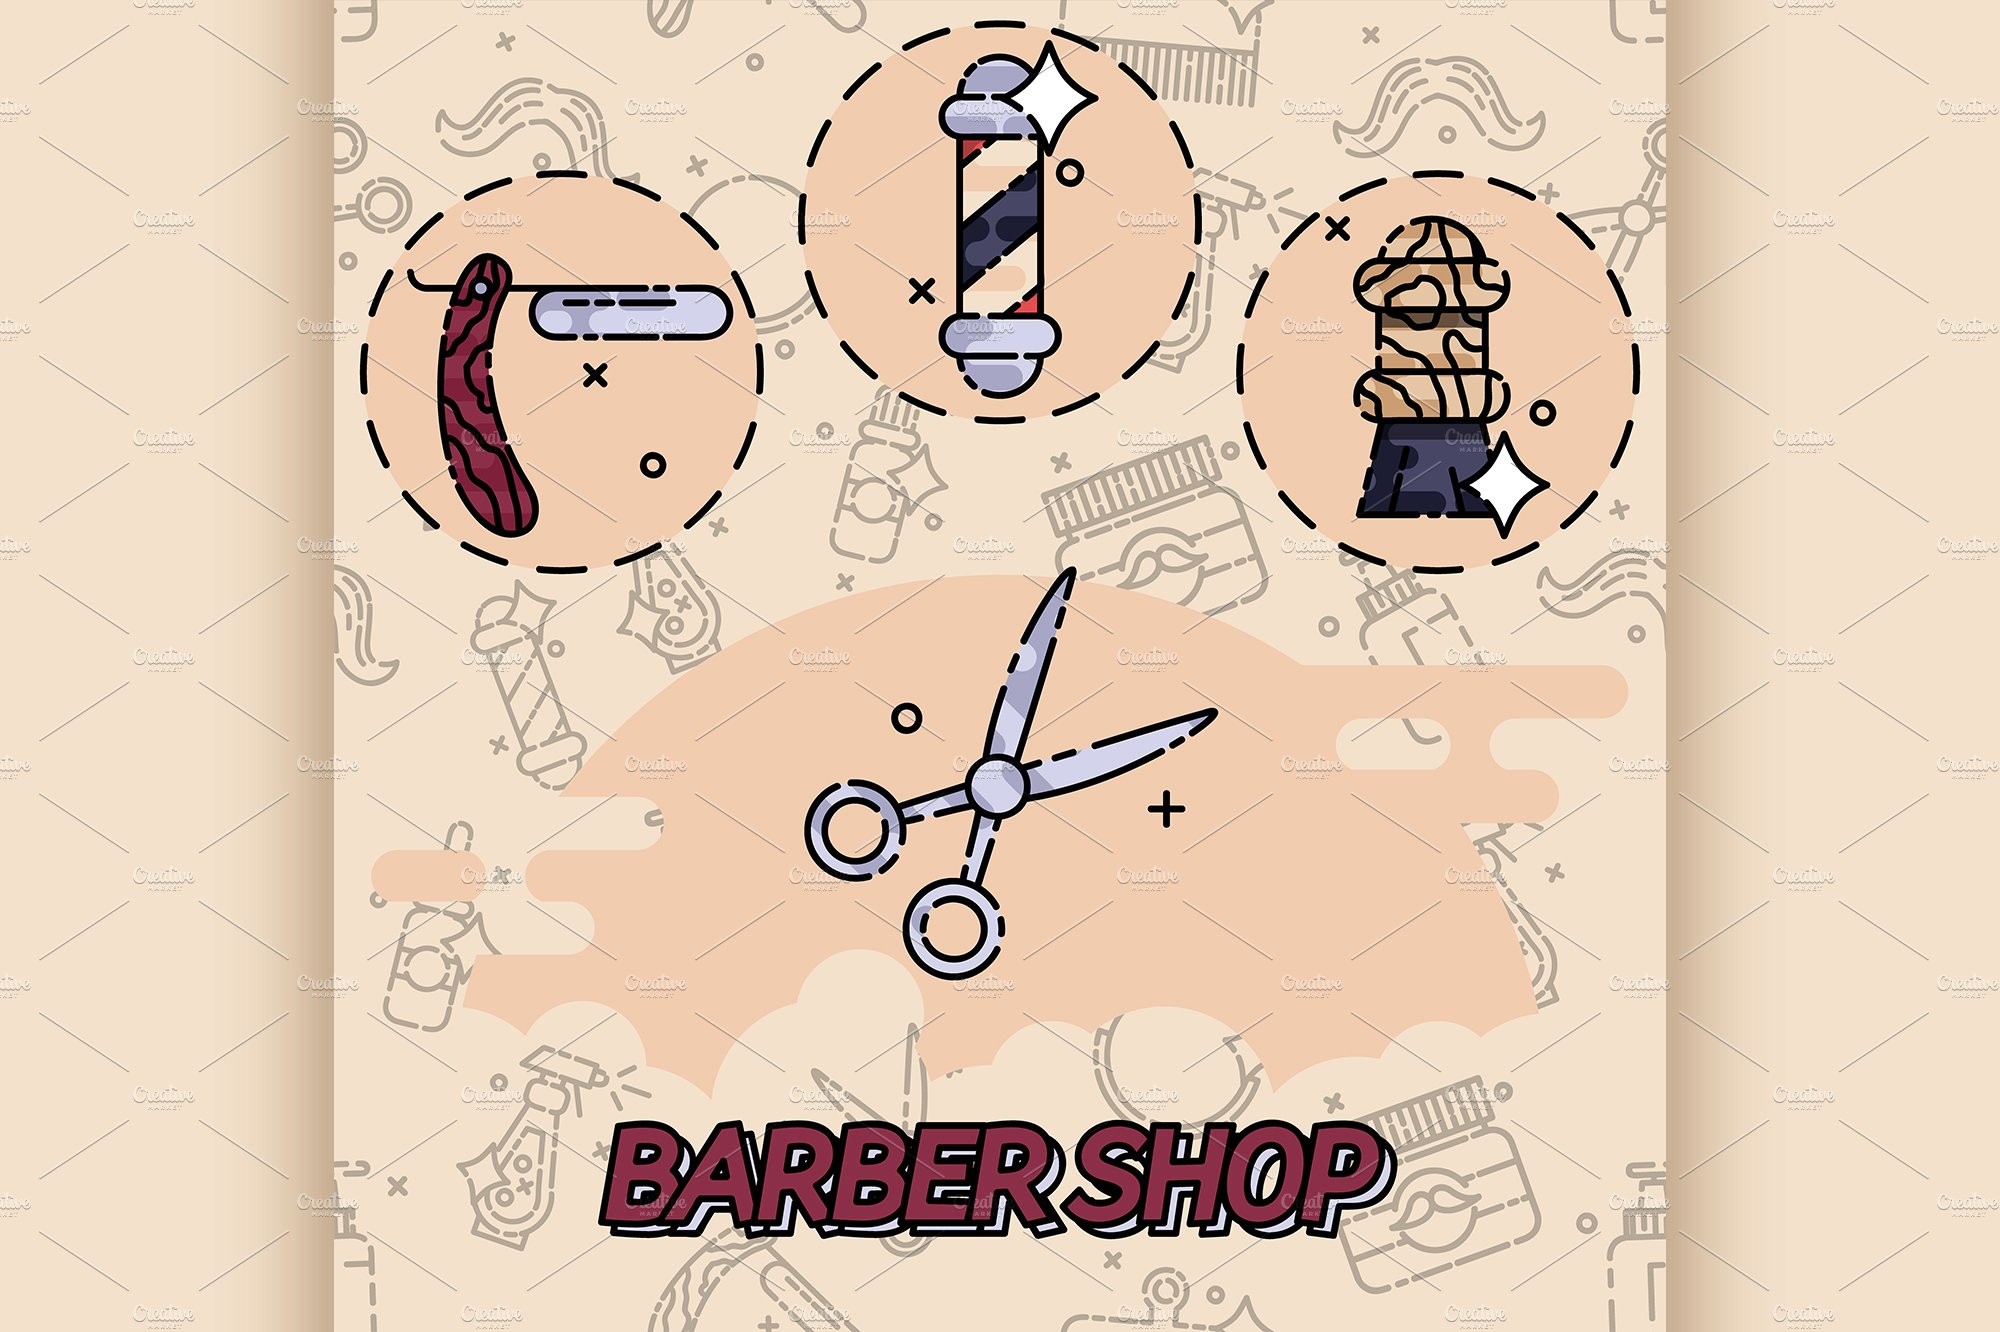 Barber shop flat concept icons cover image.